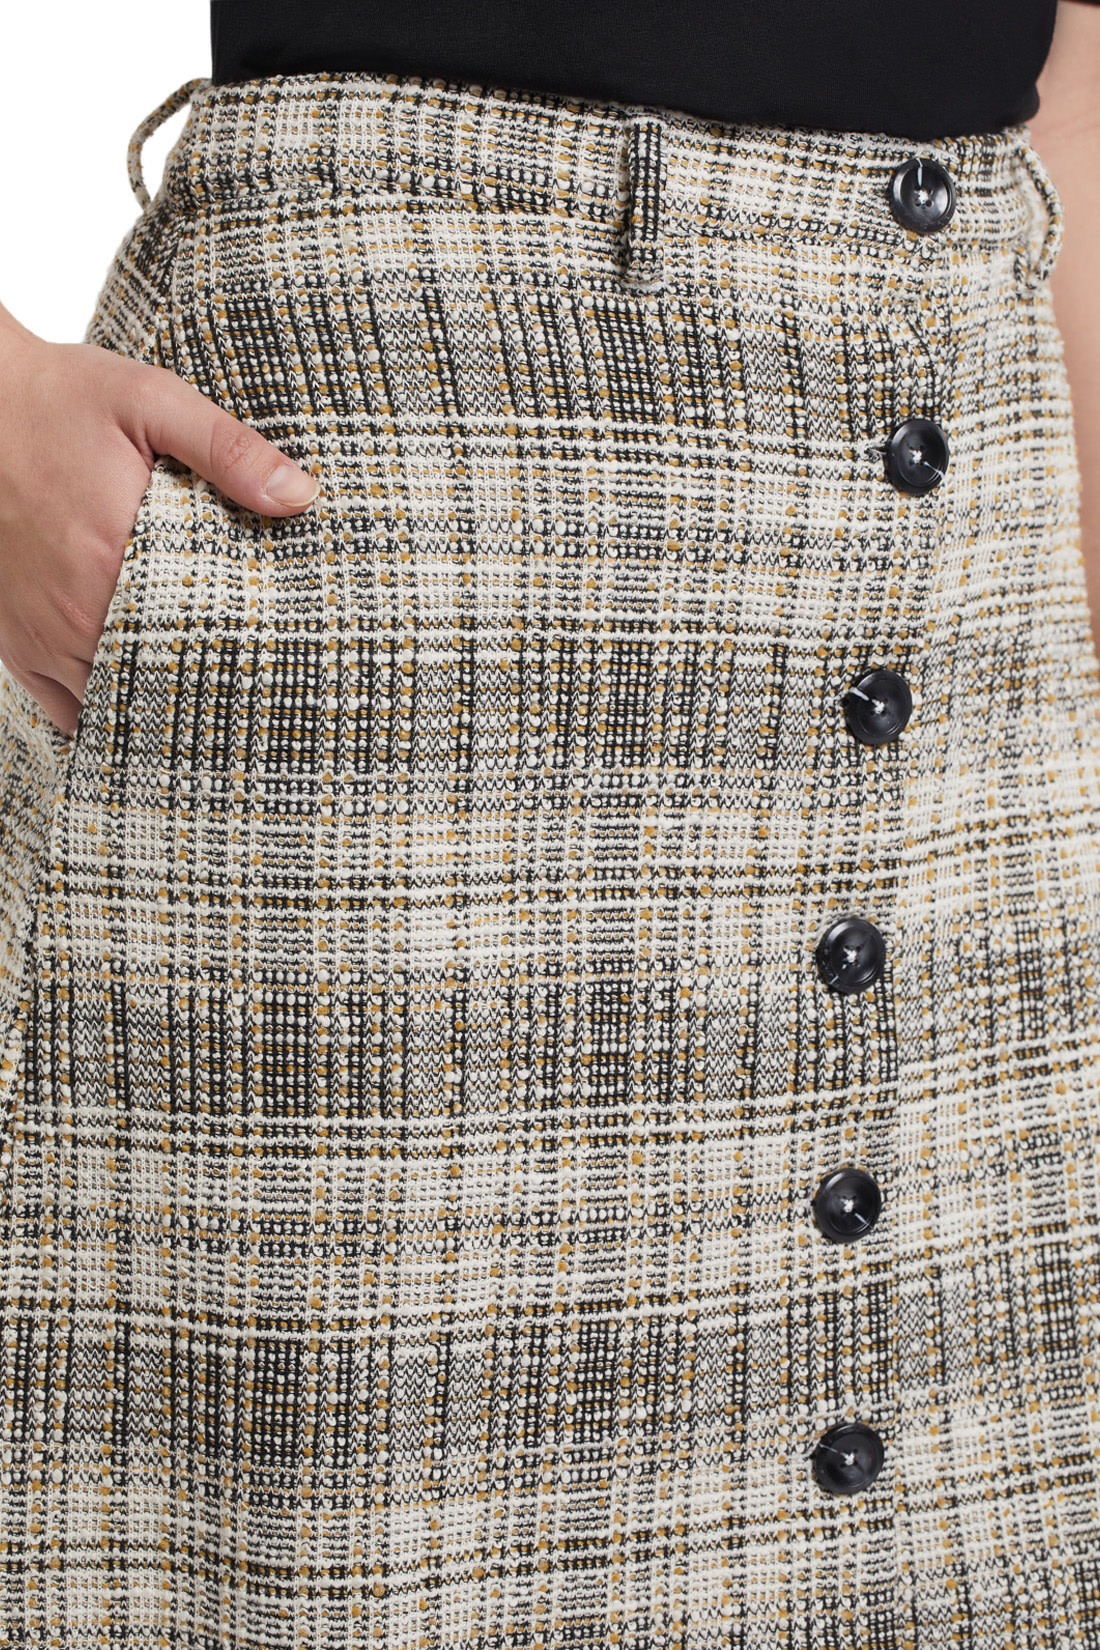 A-Line Skirt with Buttons - Nutmeg